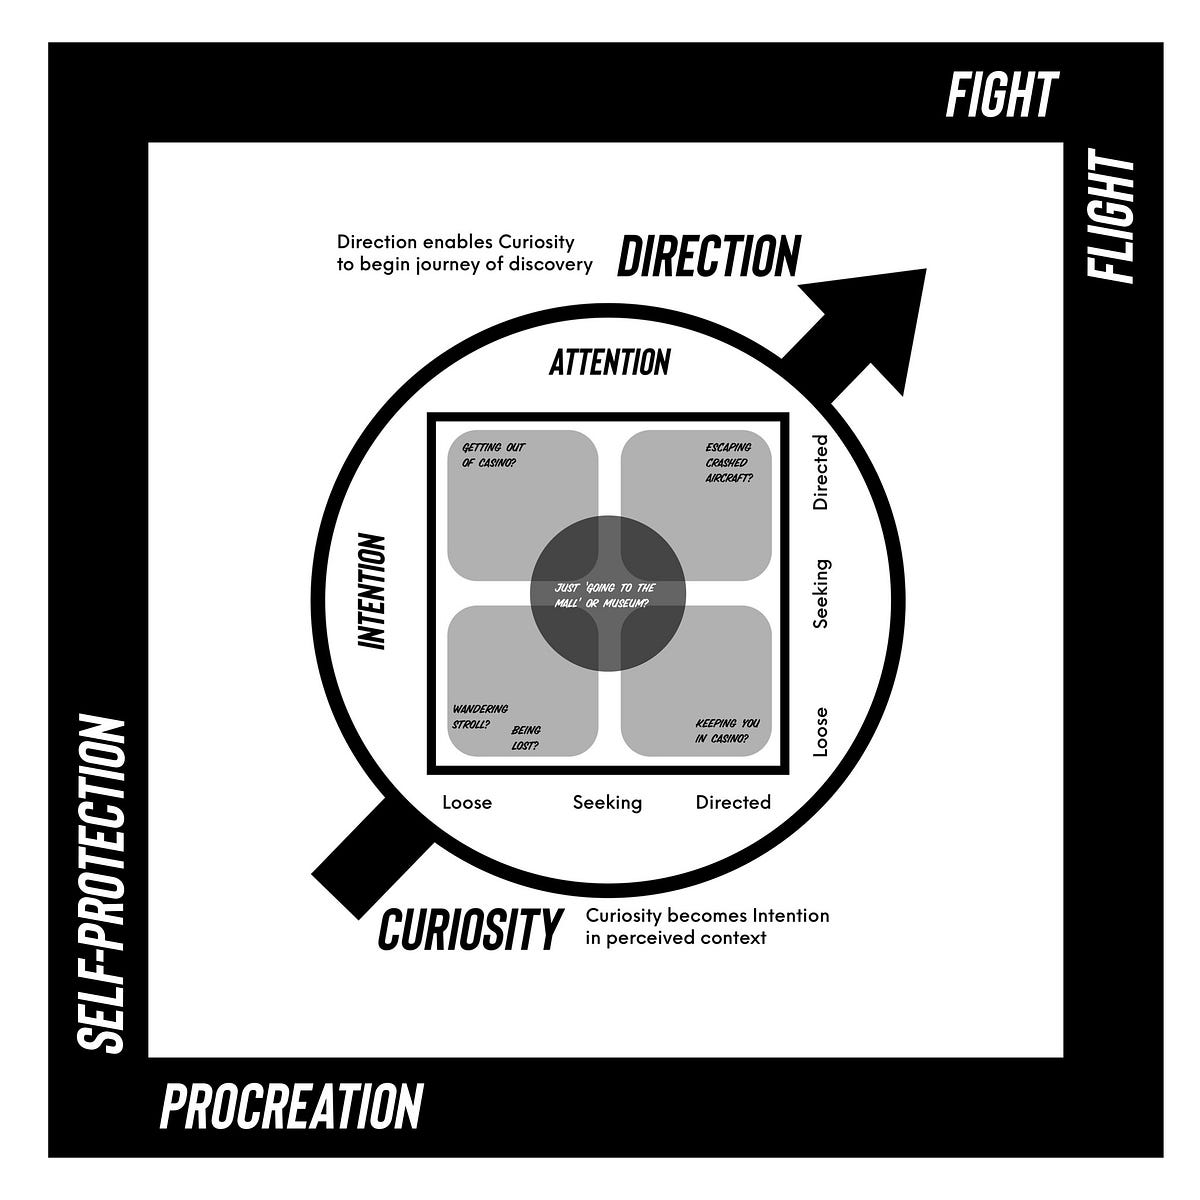 Very broad diagram has border of Self-Protection and Procreation in bottom corner of square and Fight or Flight in the top right corner. The boundaries of being